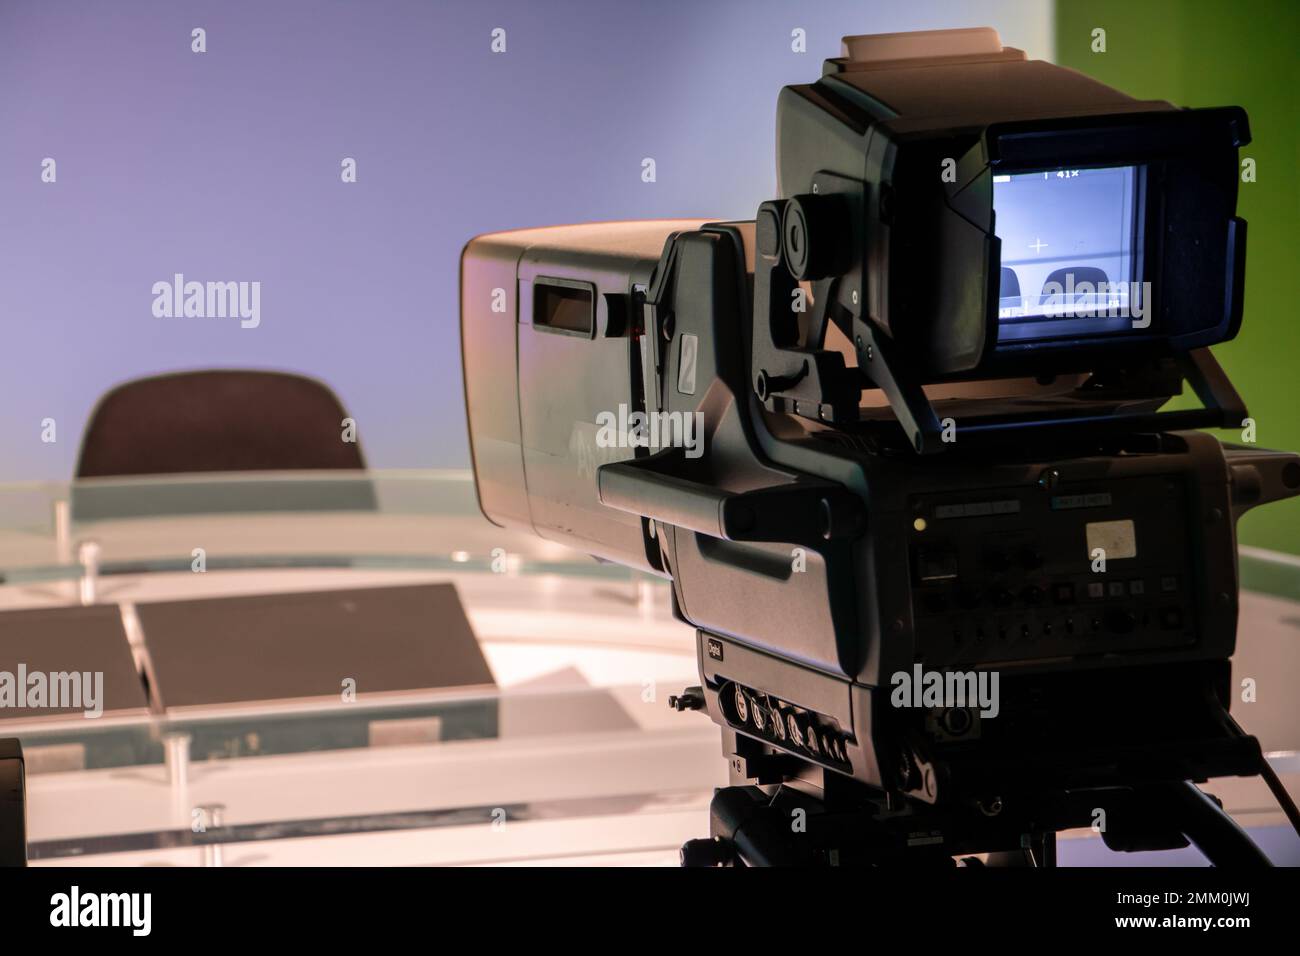 TV studio with professional camera aiming at empty seat, focus on camera. Stock Photo